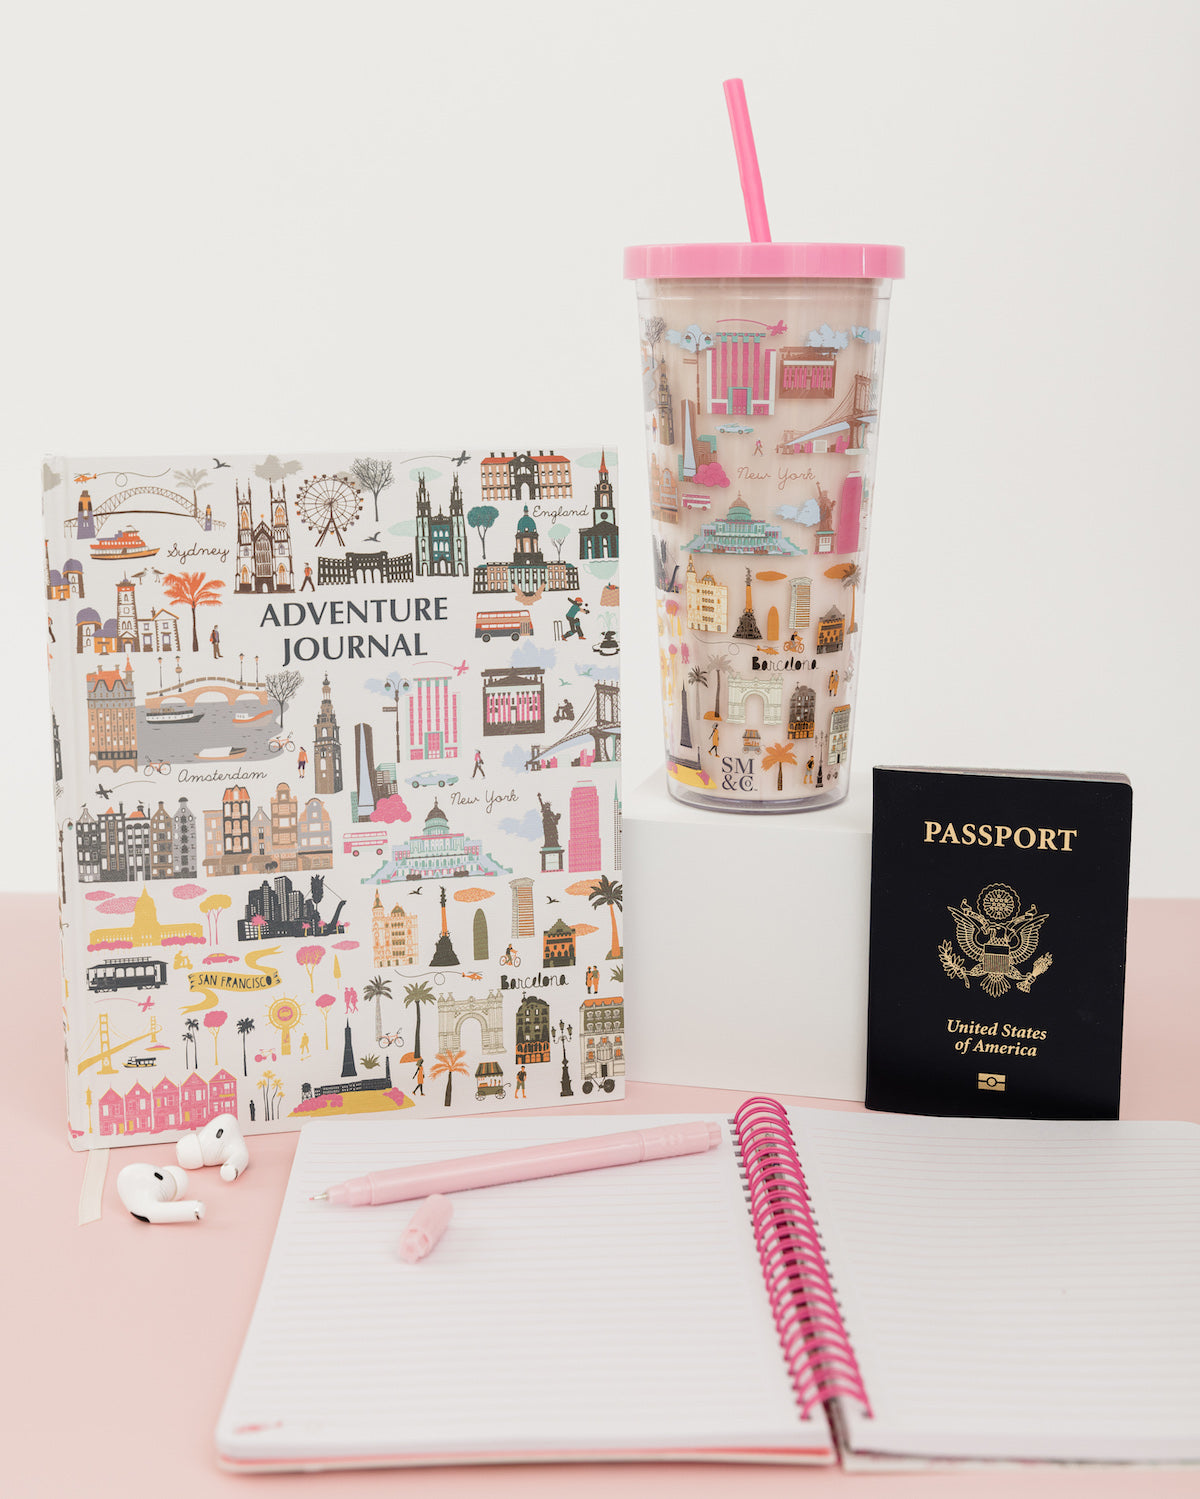 Tumbler with Straw, City Icons